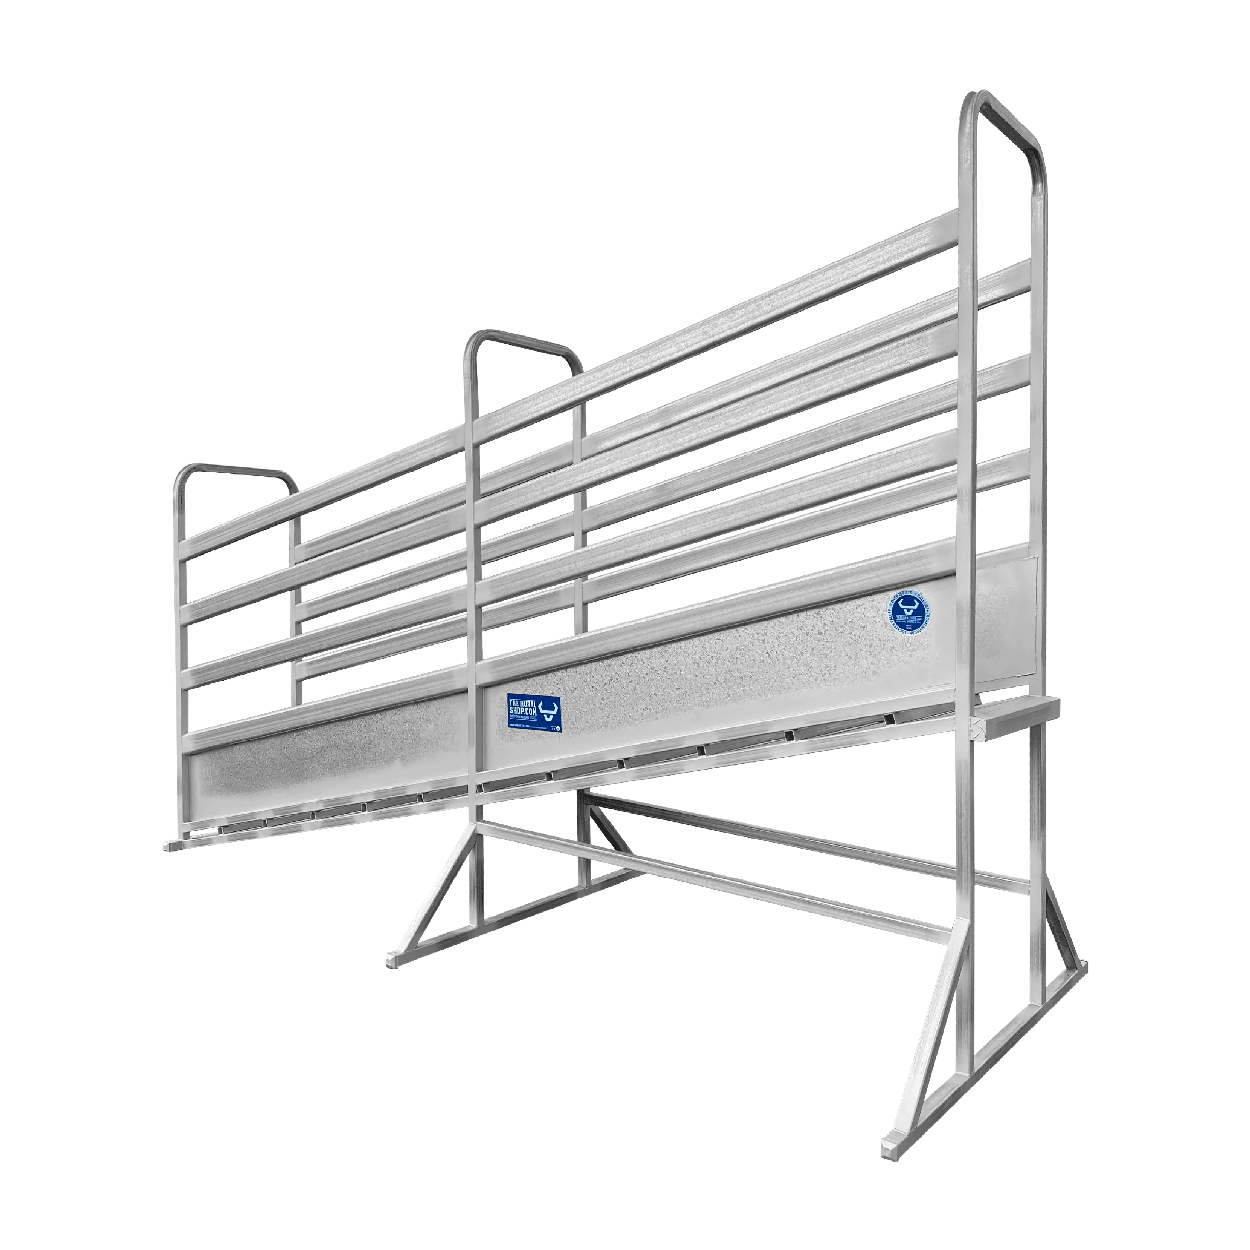 4.5m Fixed height loading ramp. Included; heavy duty construction, galvanised steel floor and sheeted sides for full 115 x 42 oval rails. Designed and built for easy, safe and efficient loading.